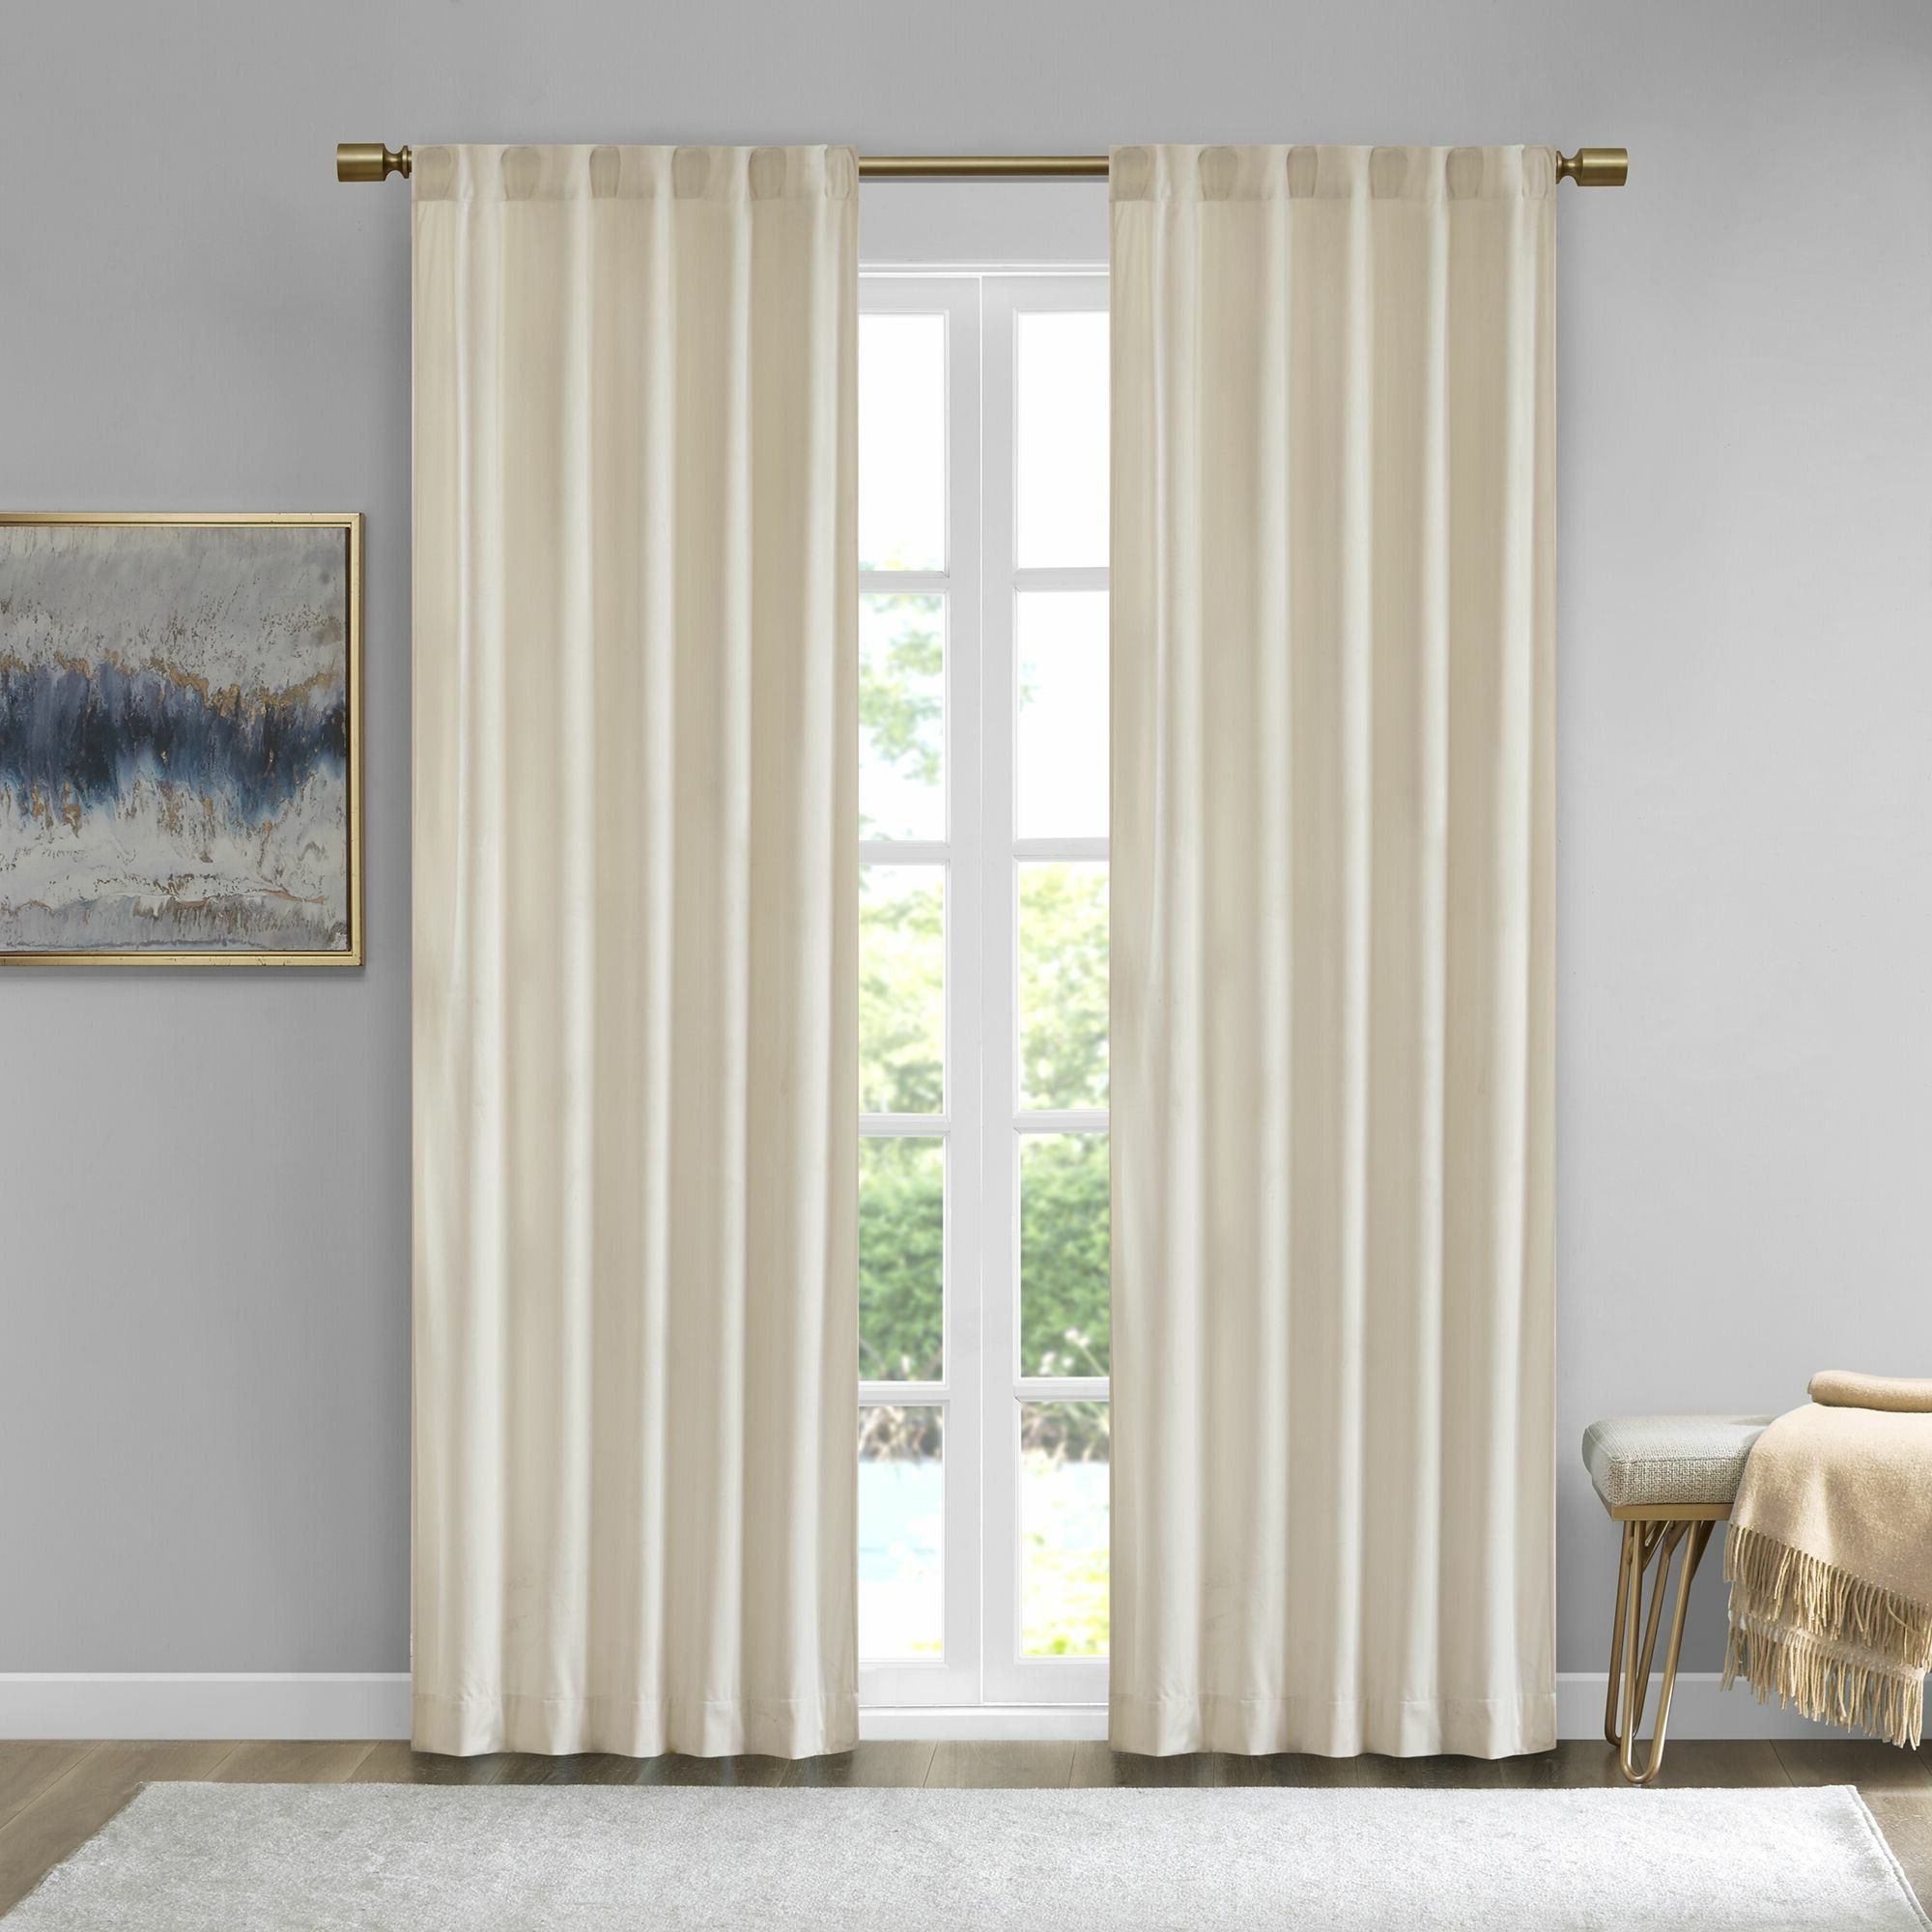 Widely Used Aurora Poly Velvet Solid Room Darkening Rod Pocket/tab Top Curtain Panels With Regard To Knotted Tab Top Window Curtain Panel Pairs (View 19 of 20)